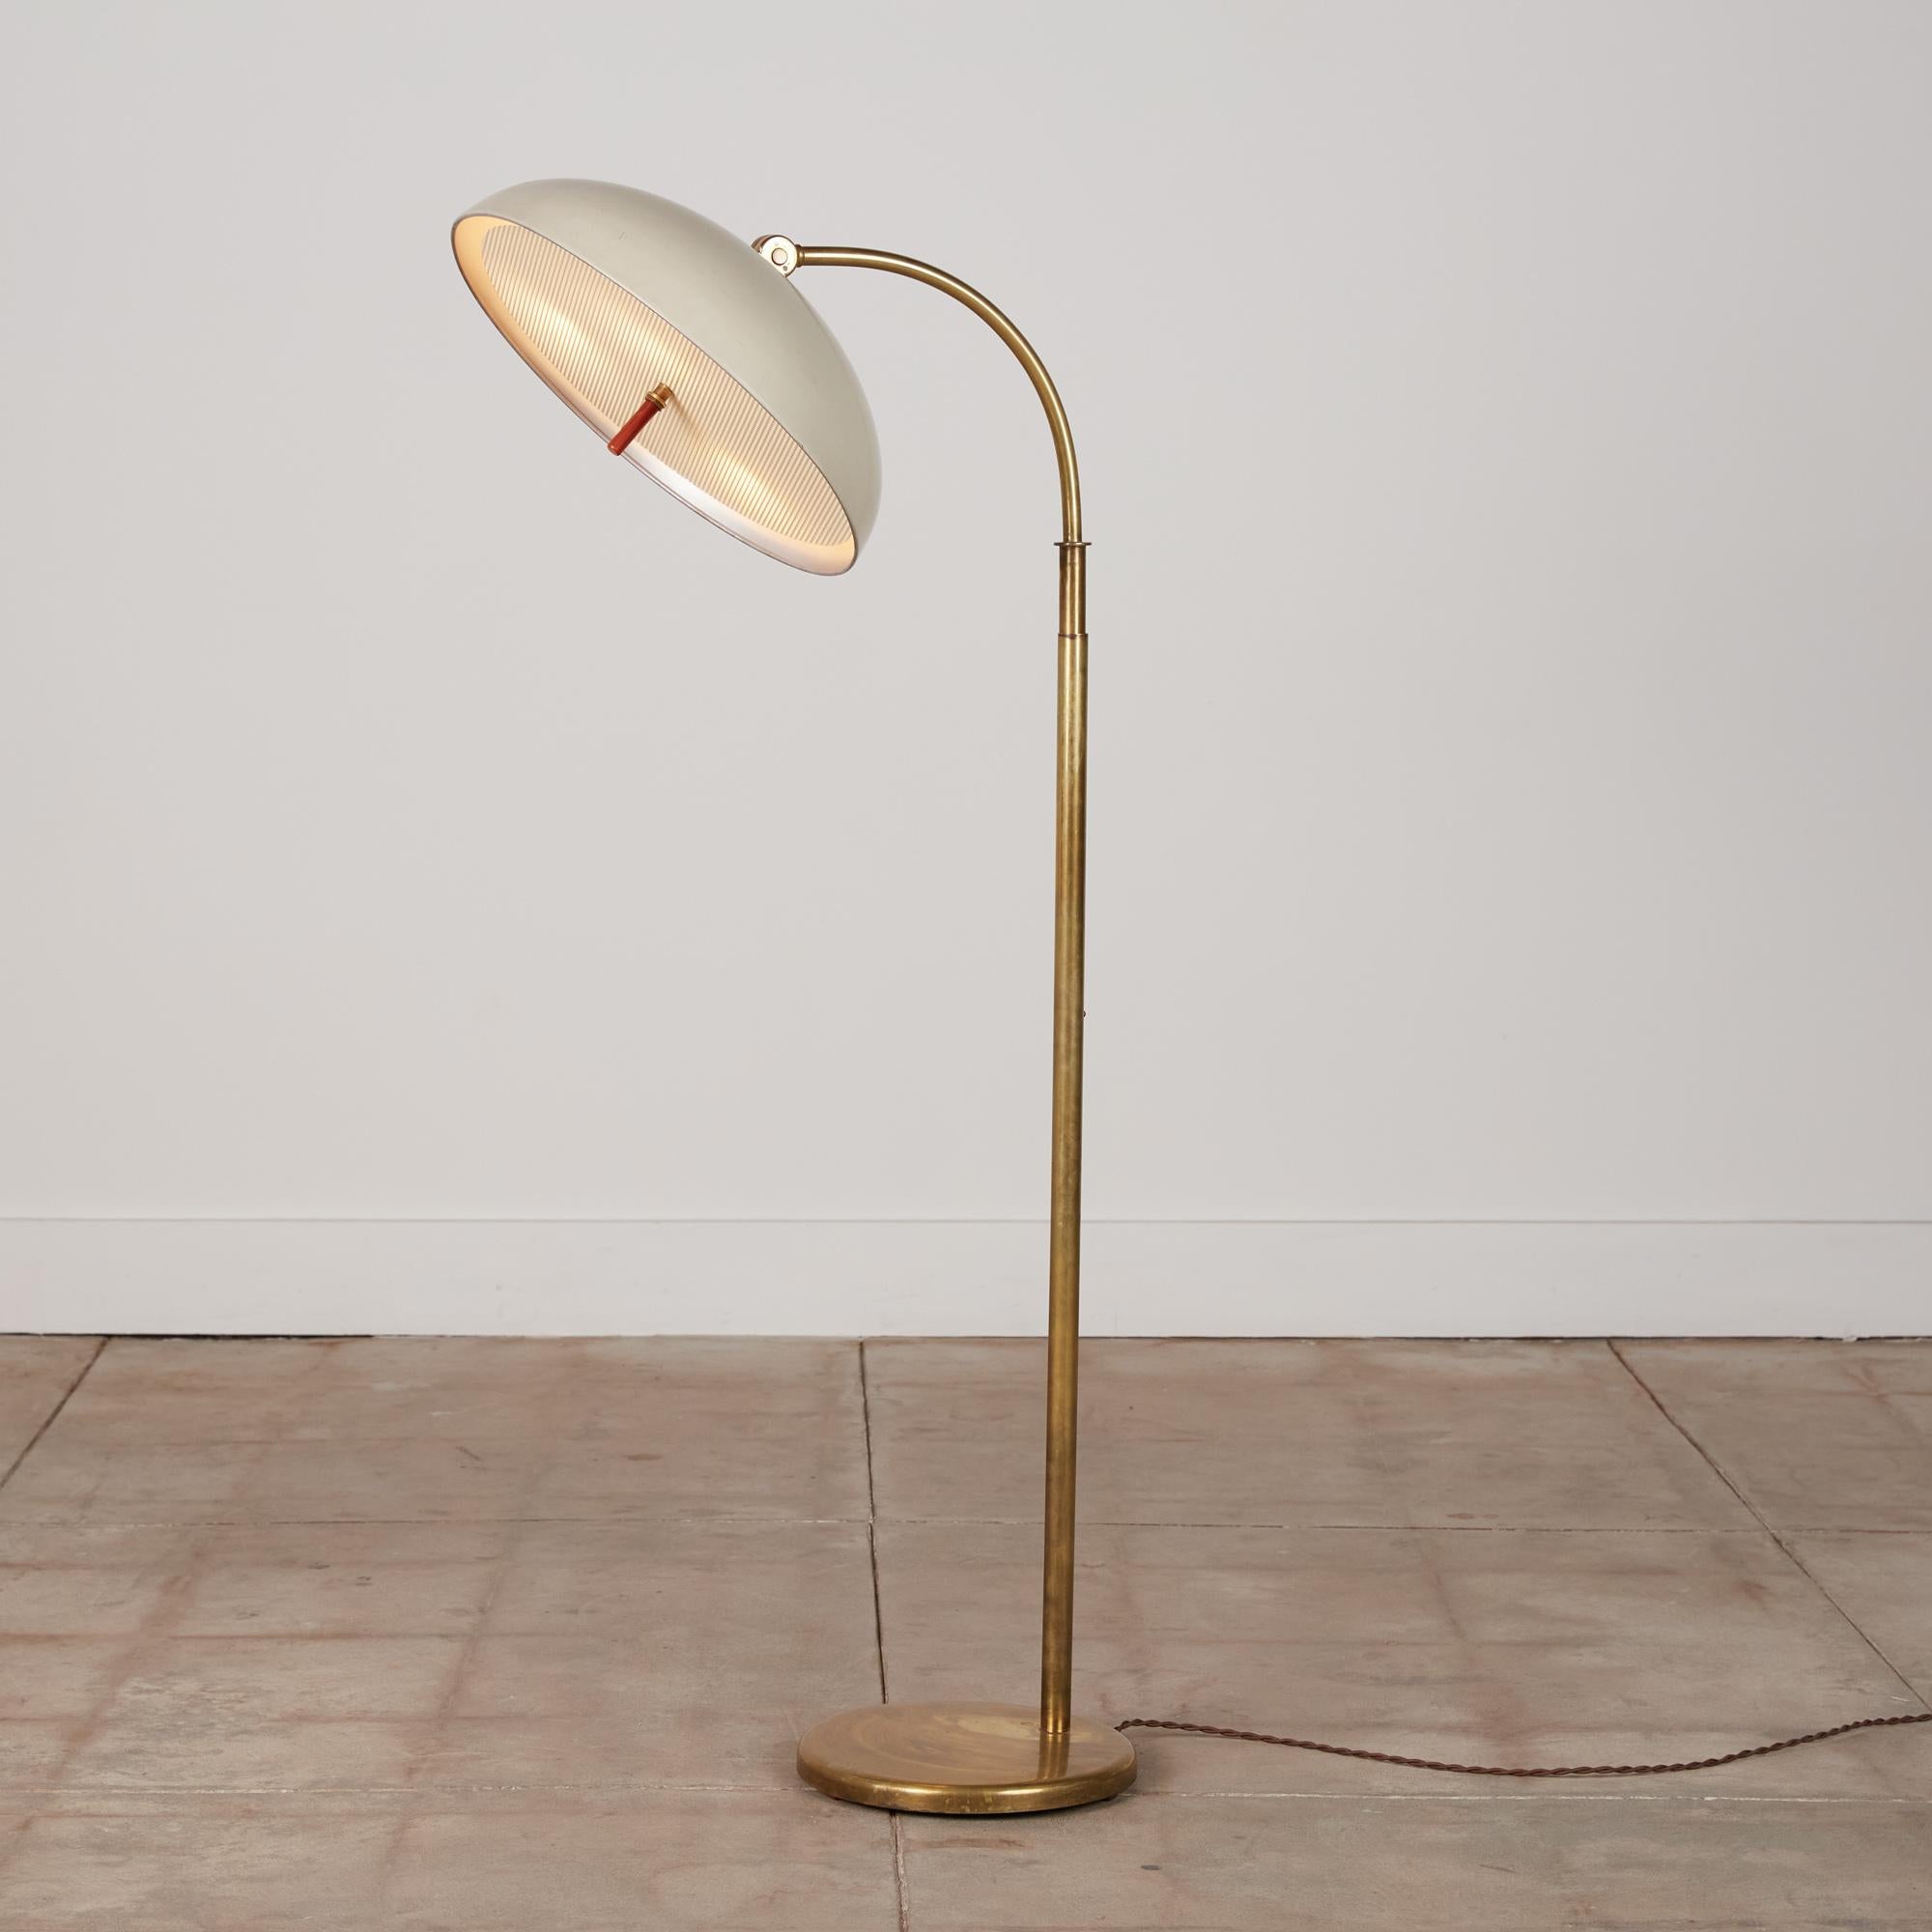 Walter von Nessen bronze floor lamp with flip-up shade and adjustable neck. The lamp features a perforated steel diffuser and a four way switch on the back of the dome.

Marked [Nessen + model number] on underside of base.

Dimensions: 16” width